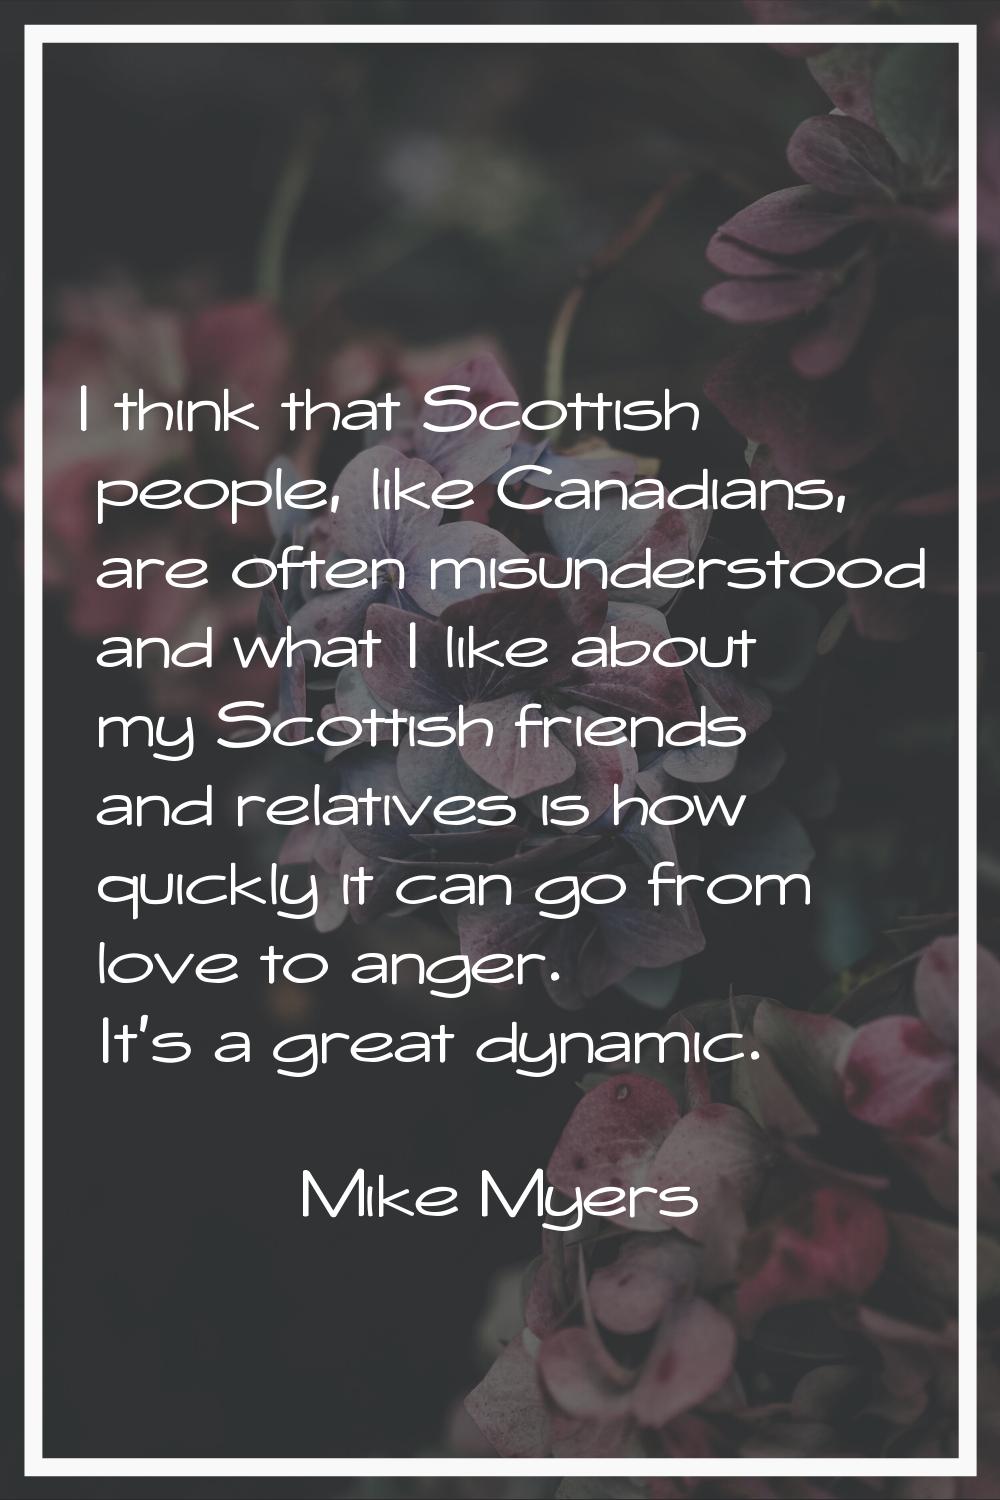 I think that Scottish people, like Canadians, are often misunderstood and what I like about my Scot